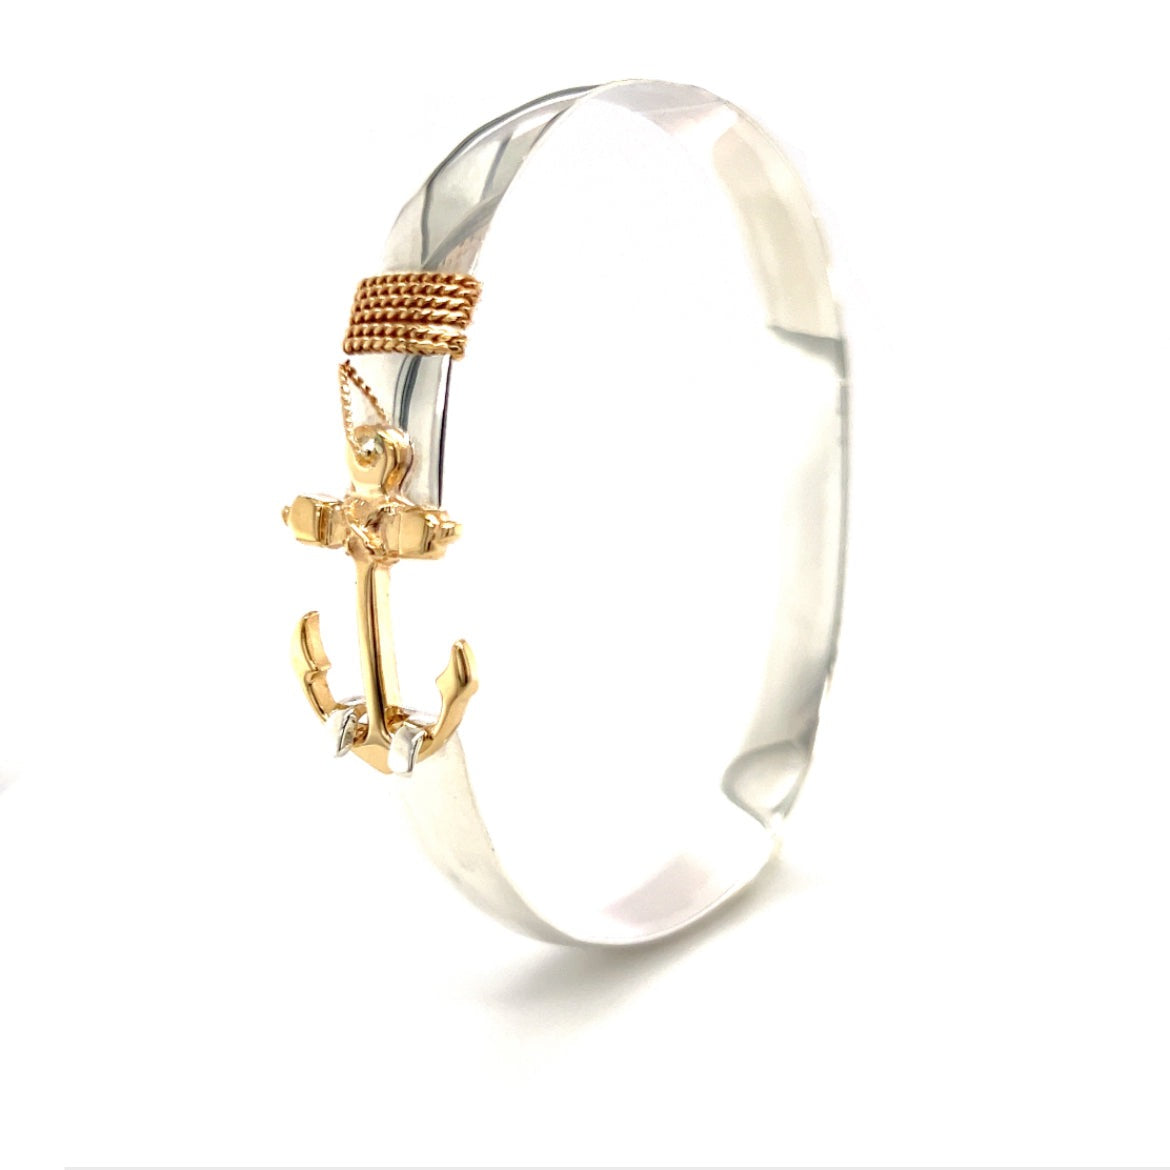 Flat 8mm Bangle Bracelet with 14K Yellow Gold Anchor and Wrap in Sterling Silver Side View